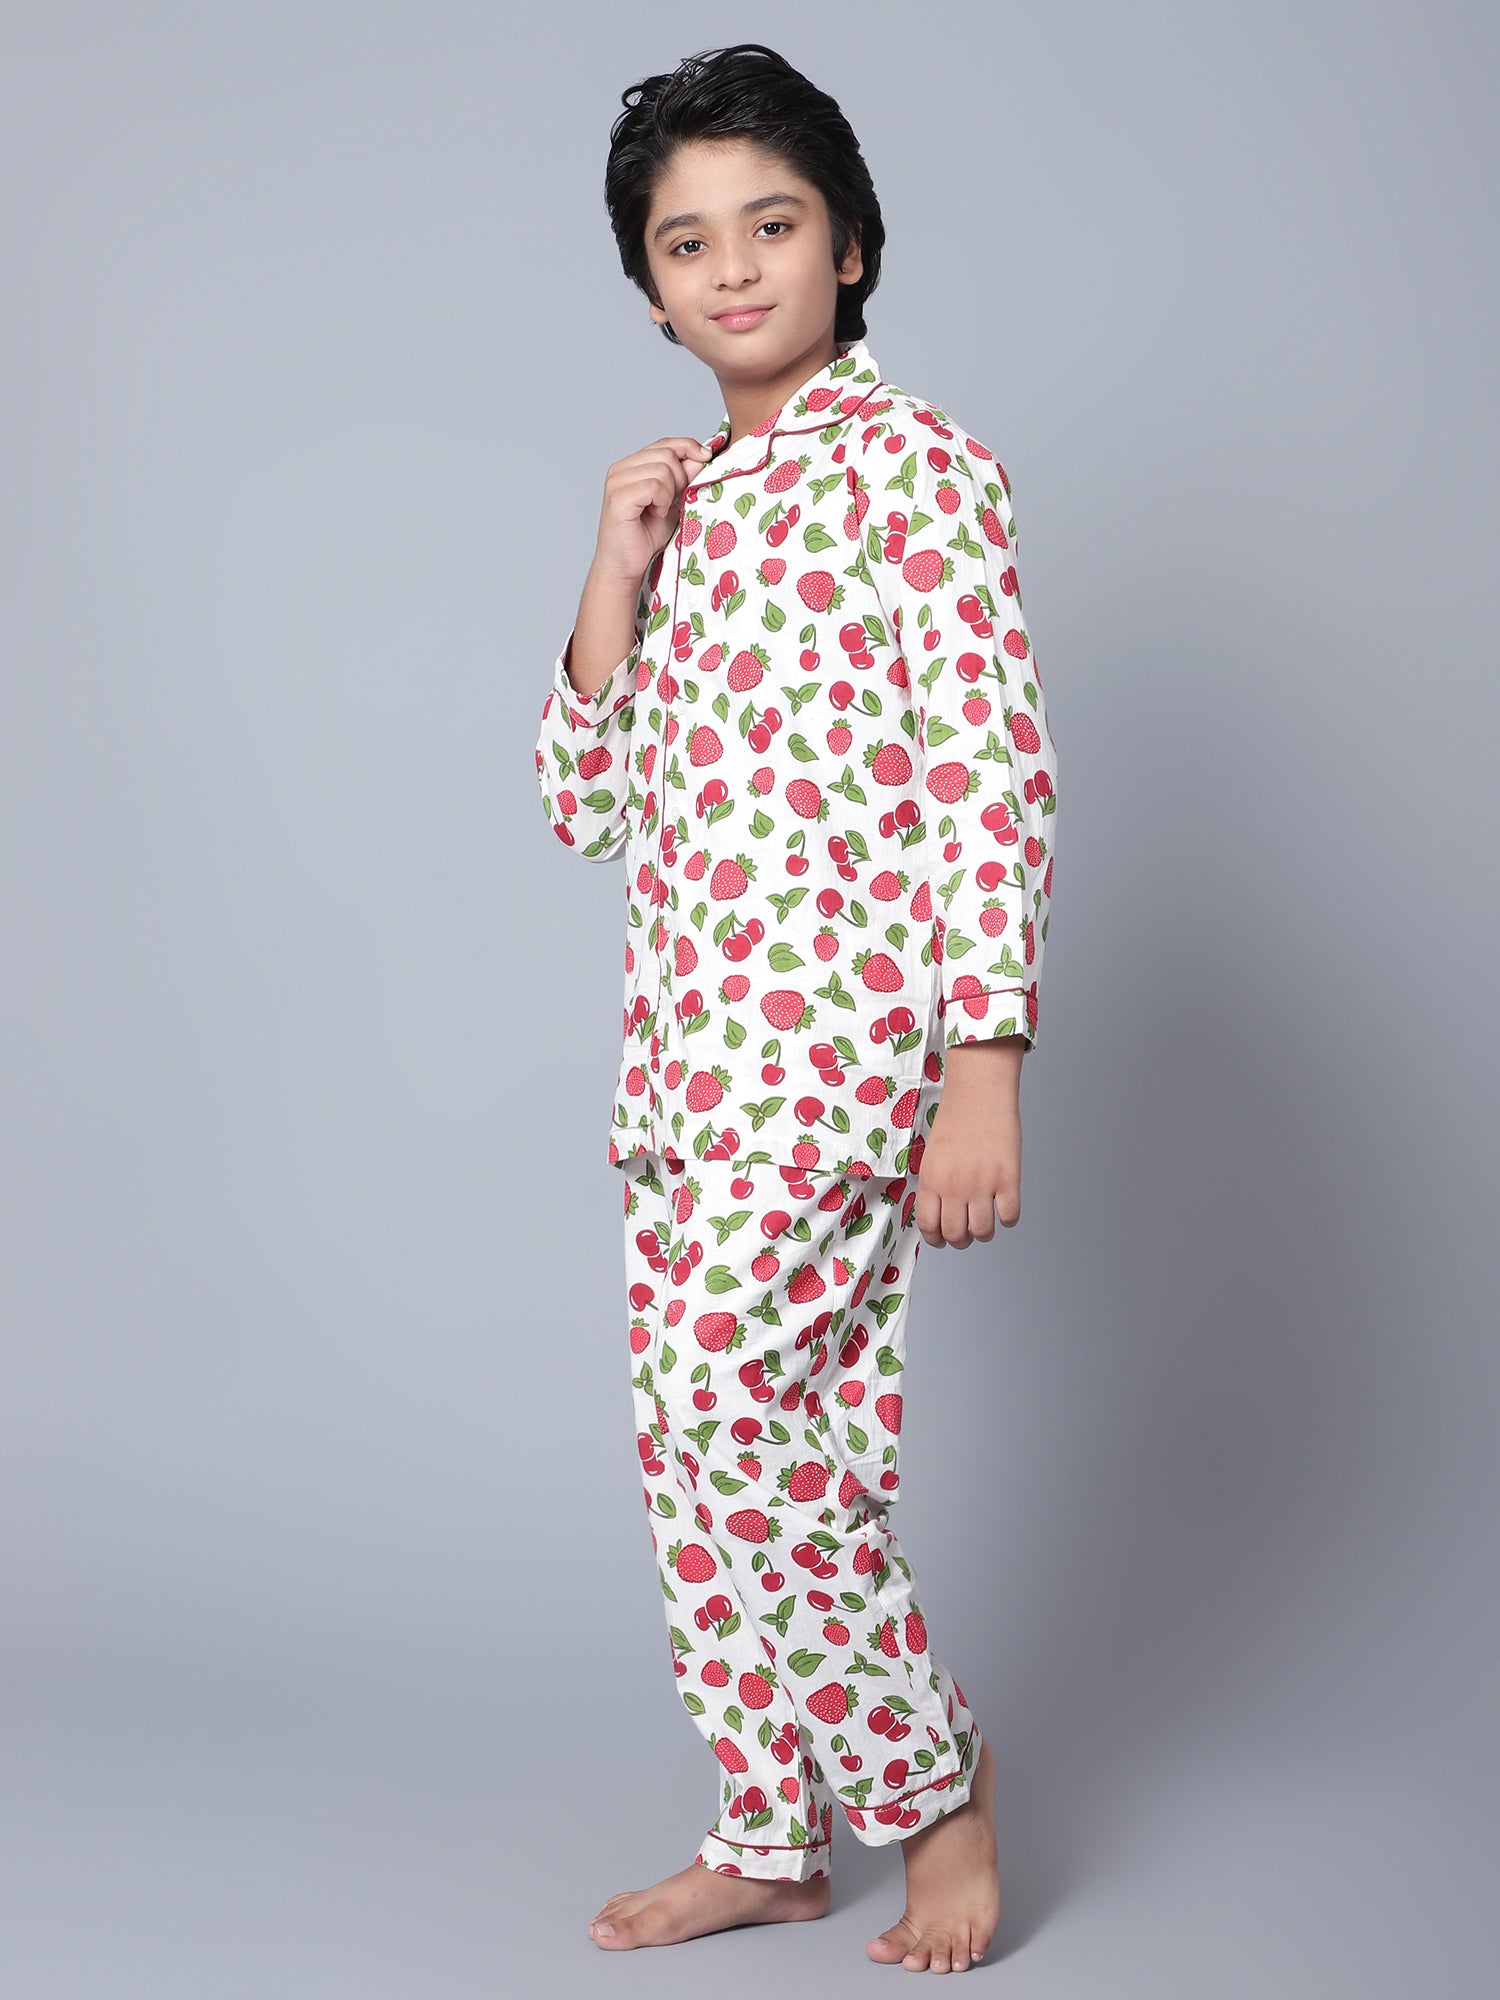 Cotton White, Red & Green Fruits Kids Night Suit For Boys & Girls